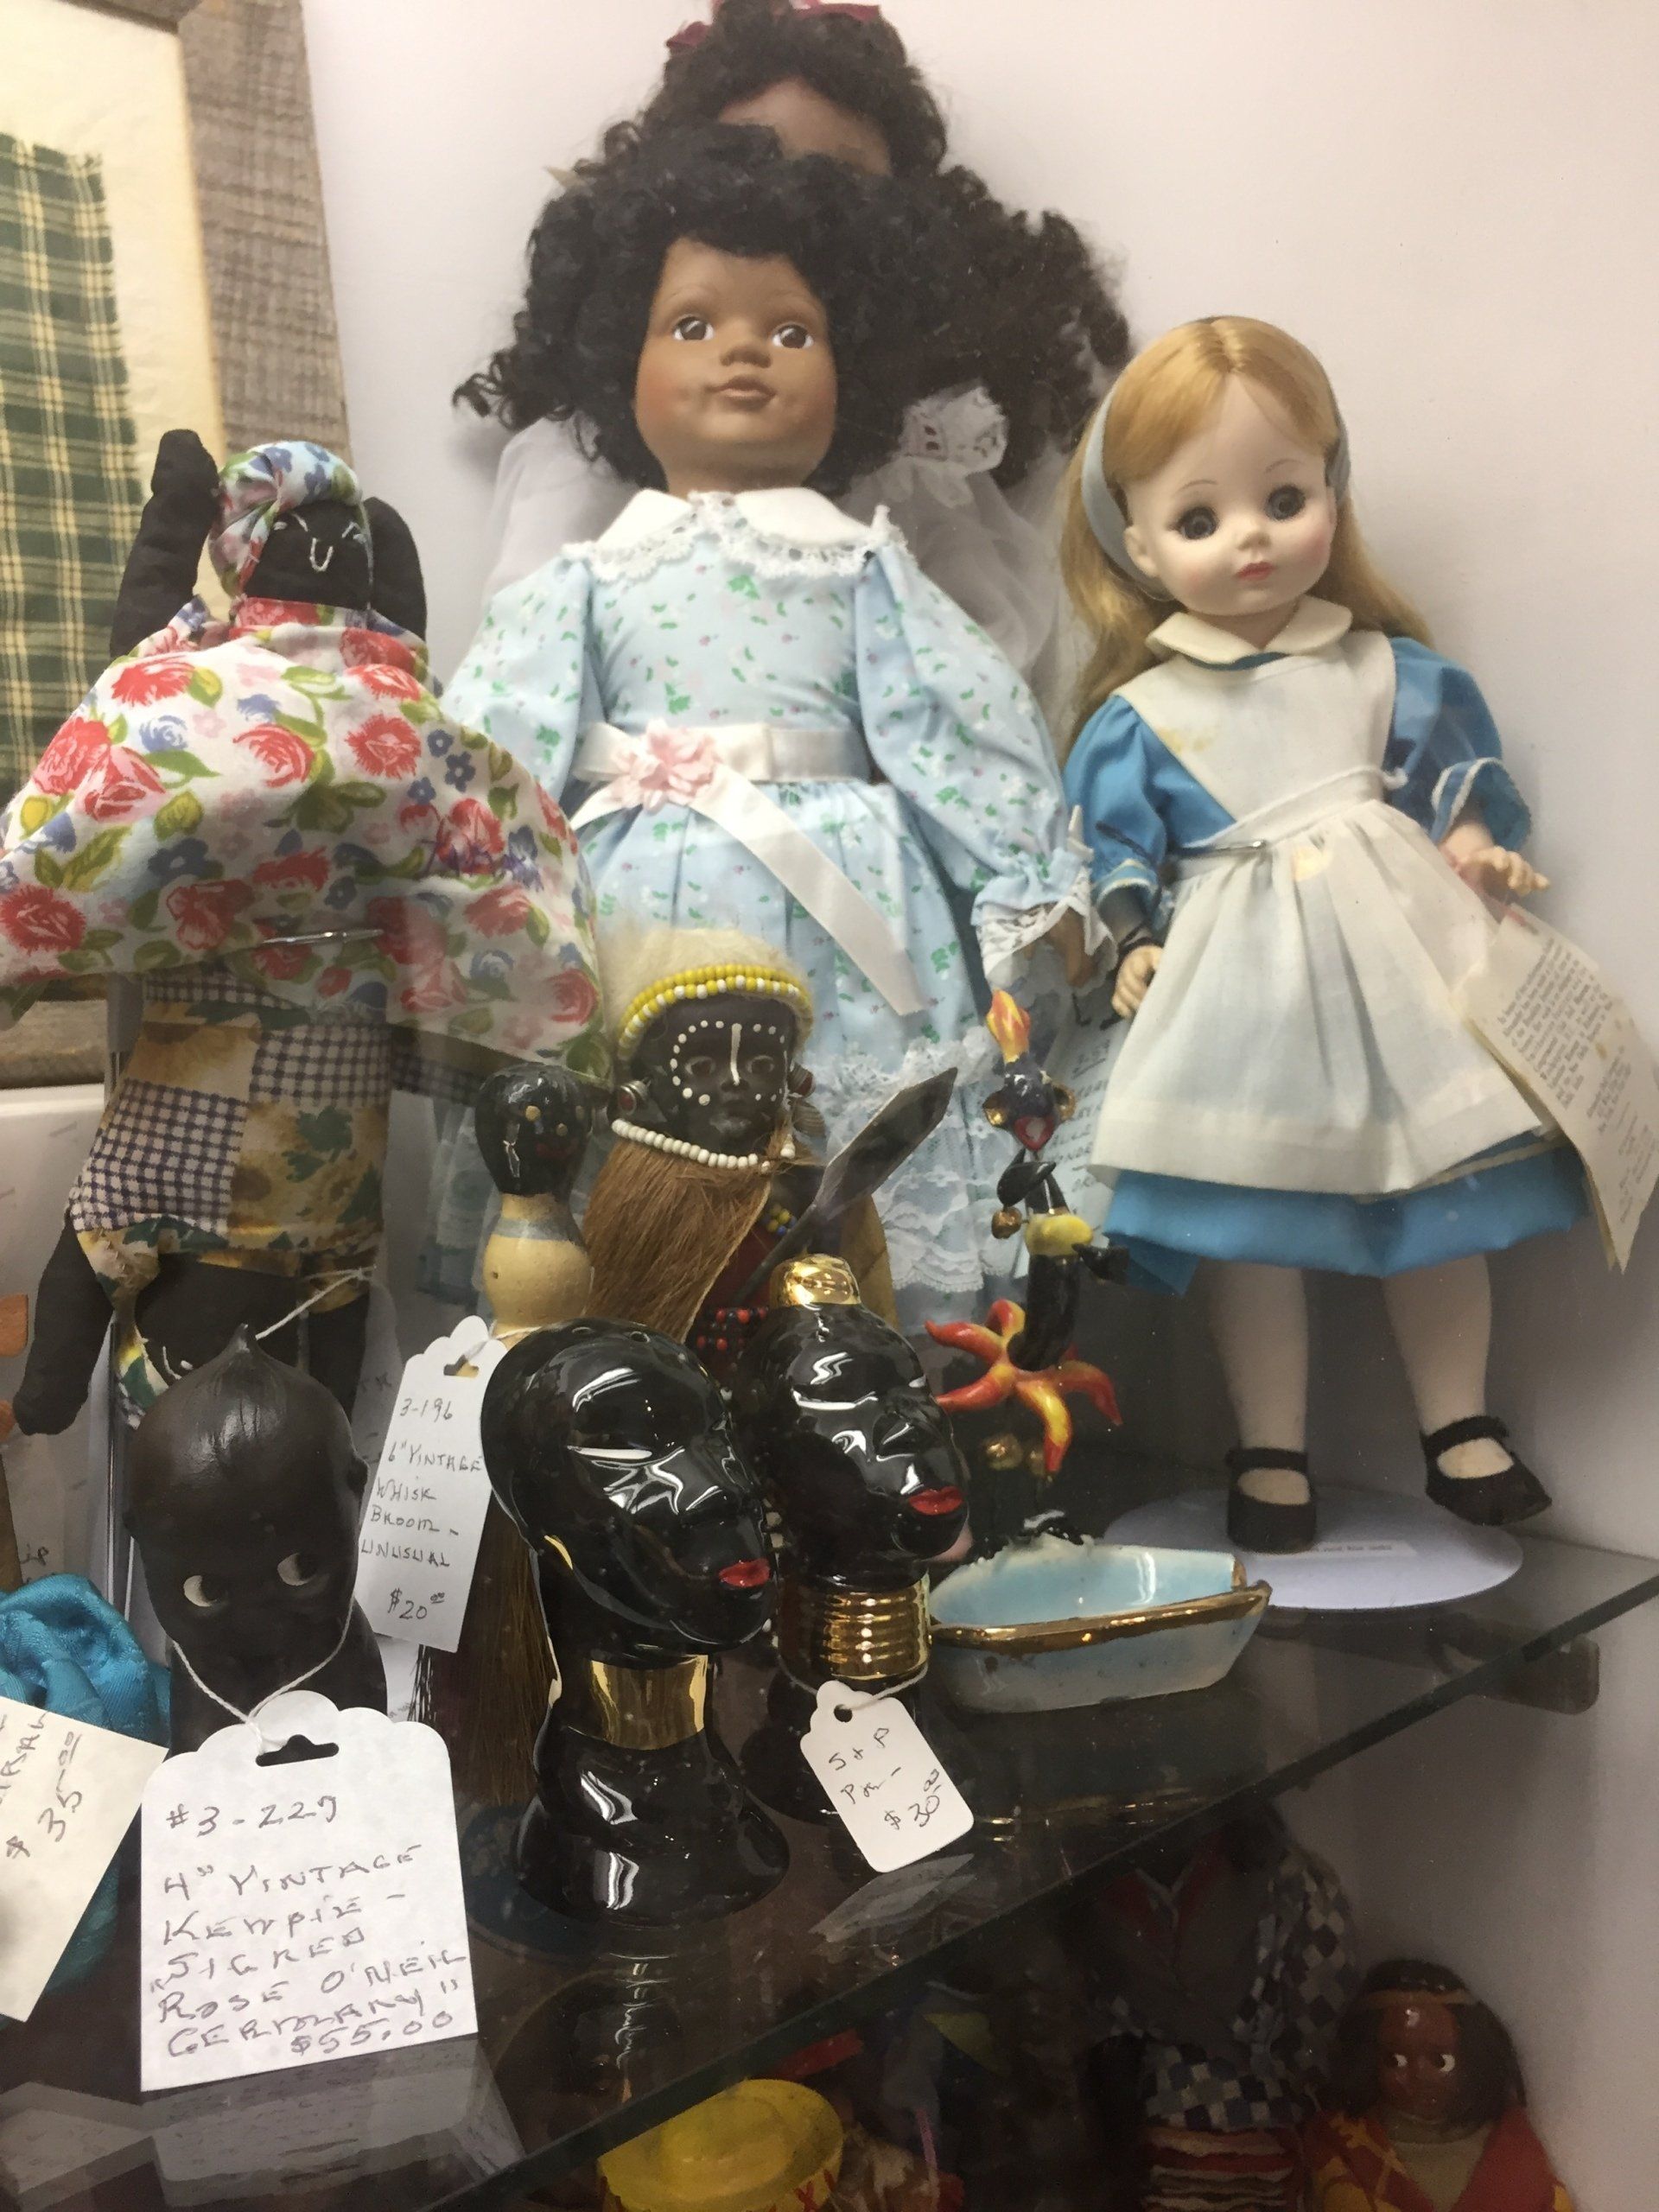 Vintage and Antique Furniture and Collectibles in Bouckville, New York